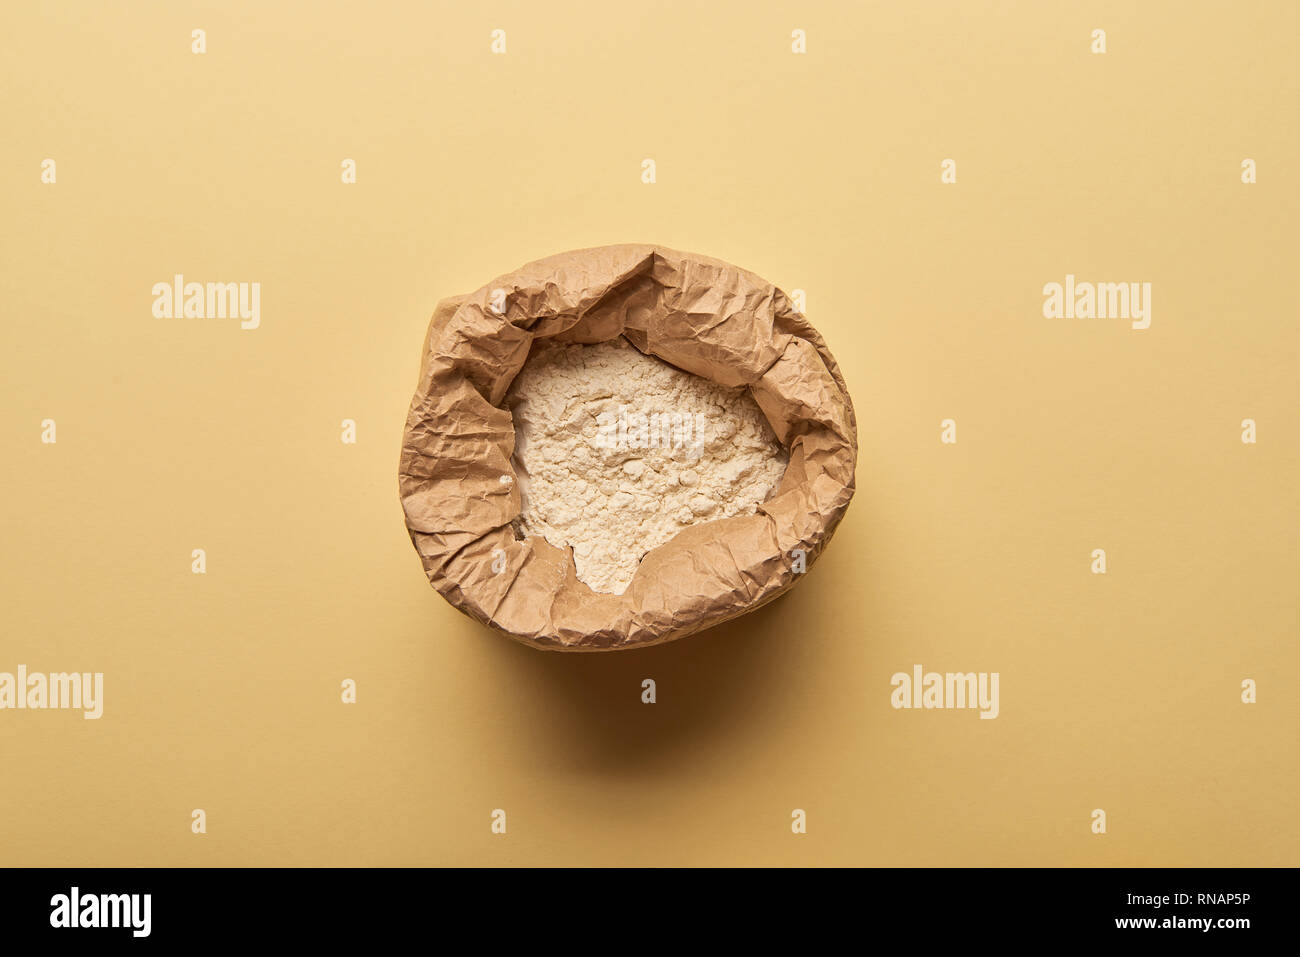 Download Top View Of Paper Bag Full Of Flour On Yellow Background Stock Photo Alamy Yellowimages Mockups